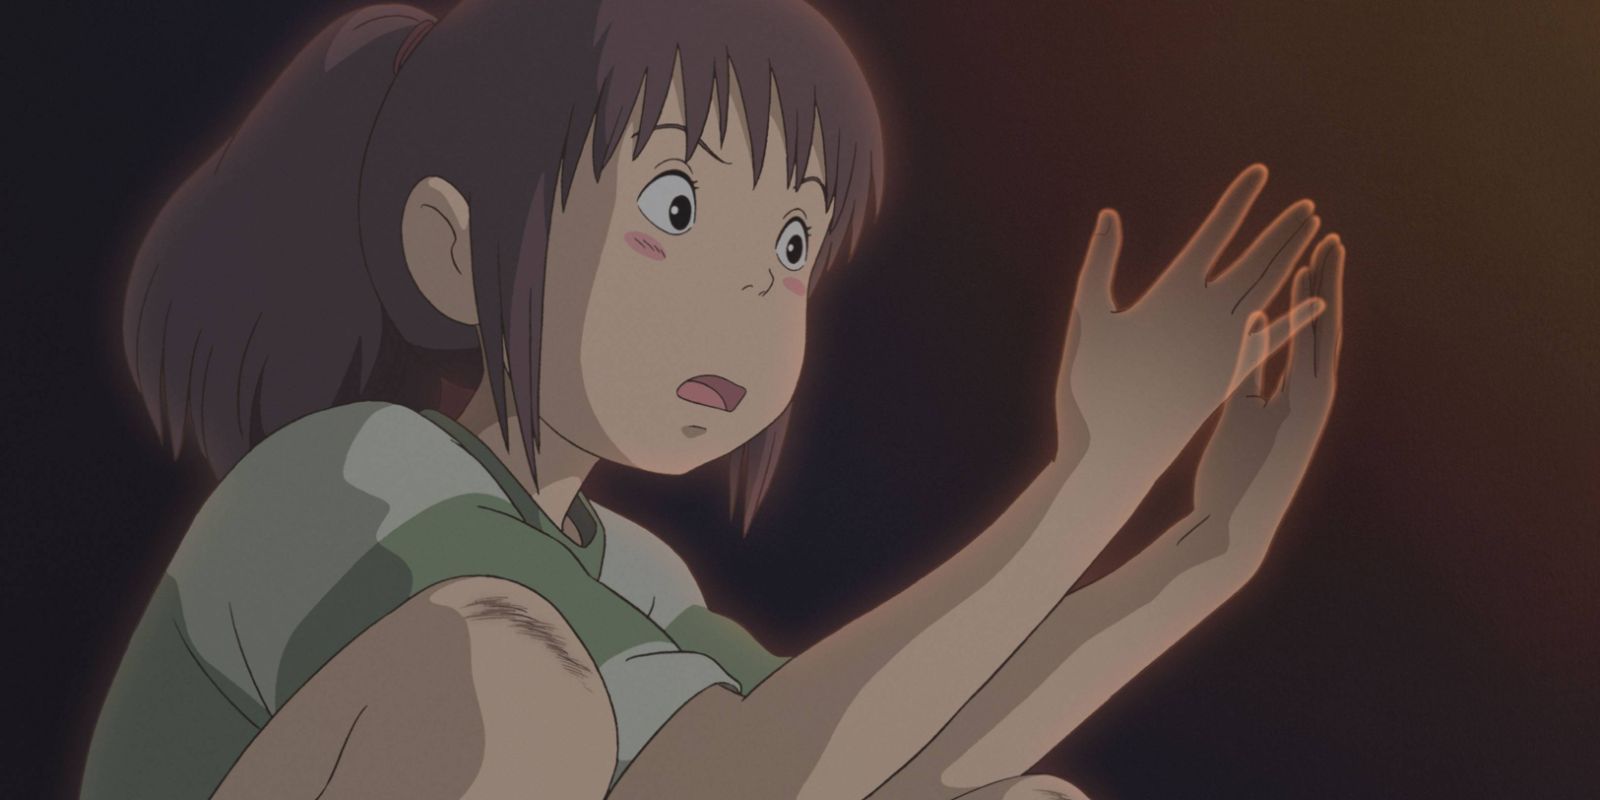 Chihiro's hands disappearing as she looks shocked.